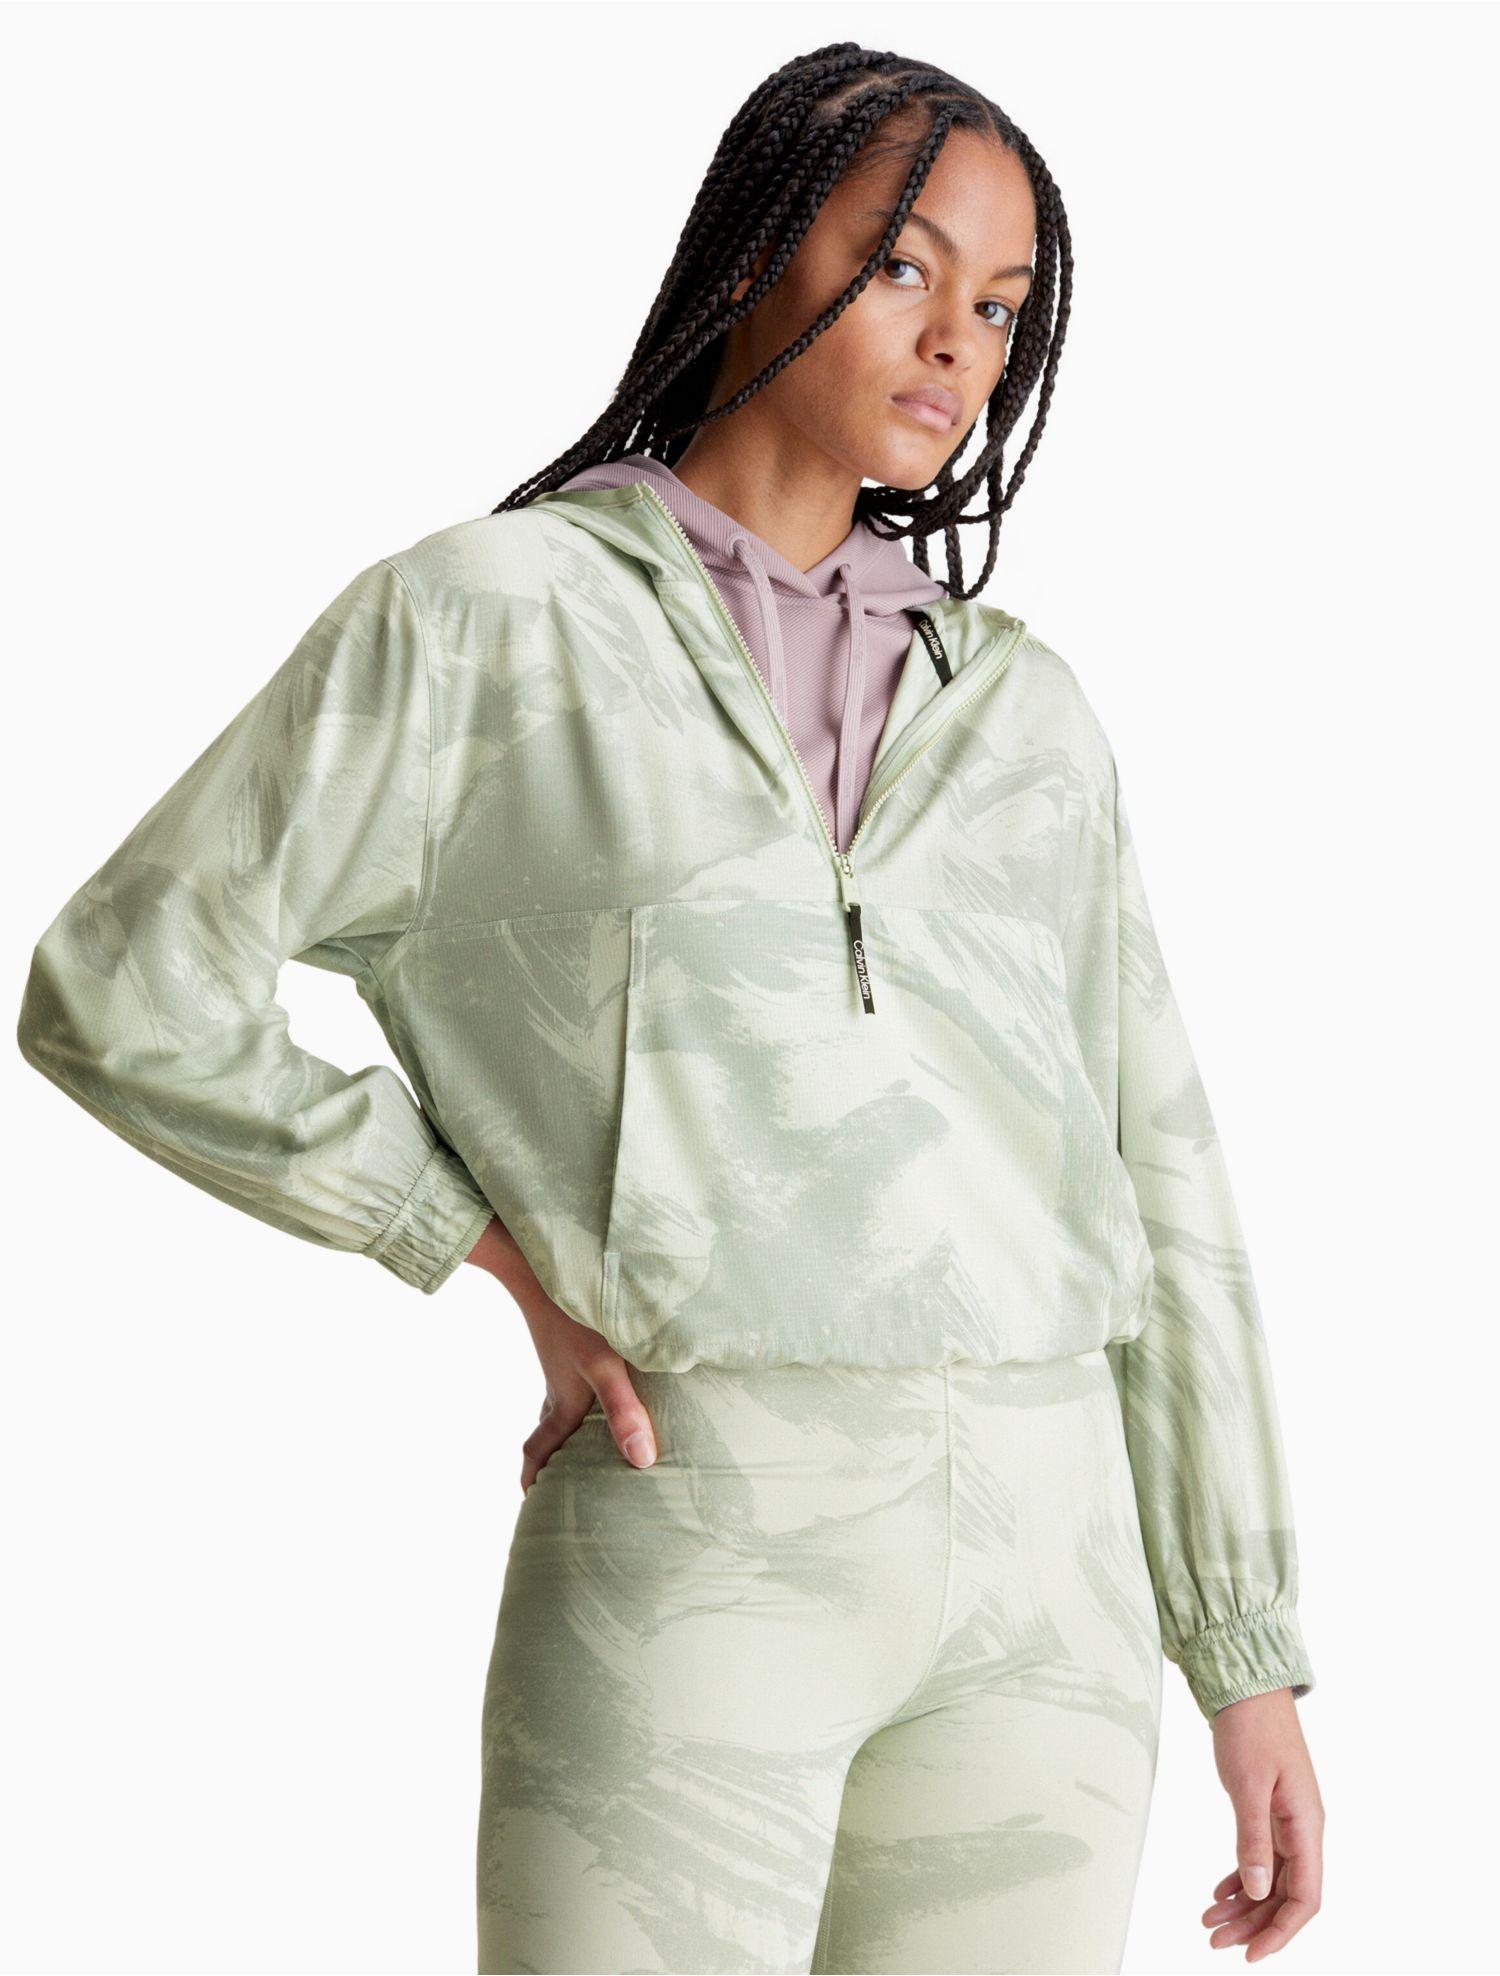 Calvin Klein Ck Sport Printed Boxy Cropped Anorak Jacket in Green | Lyst